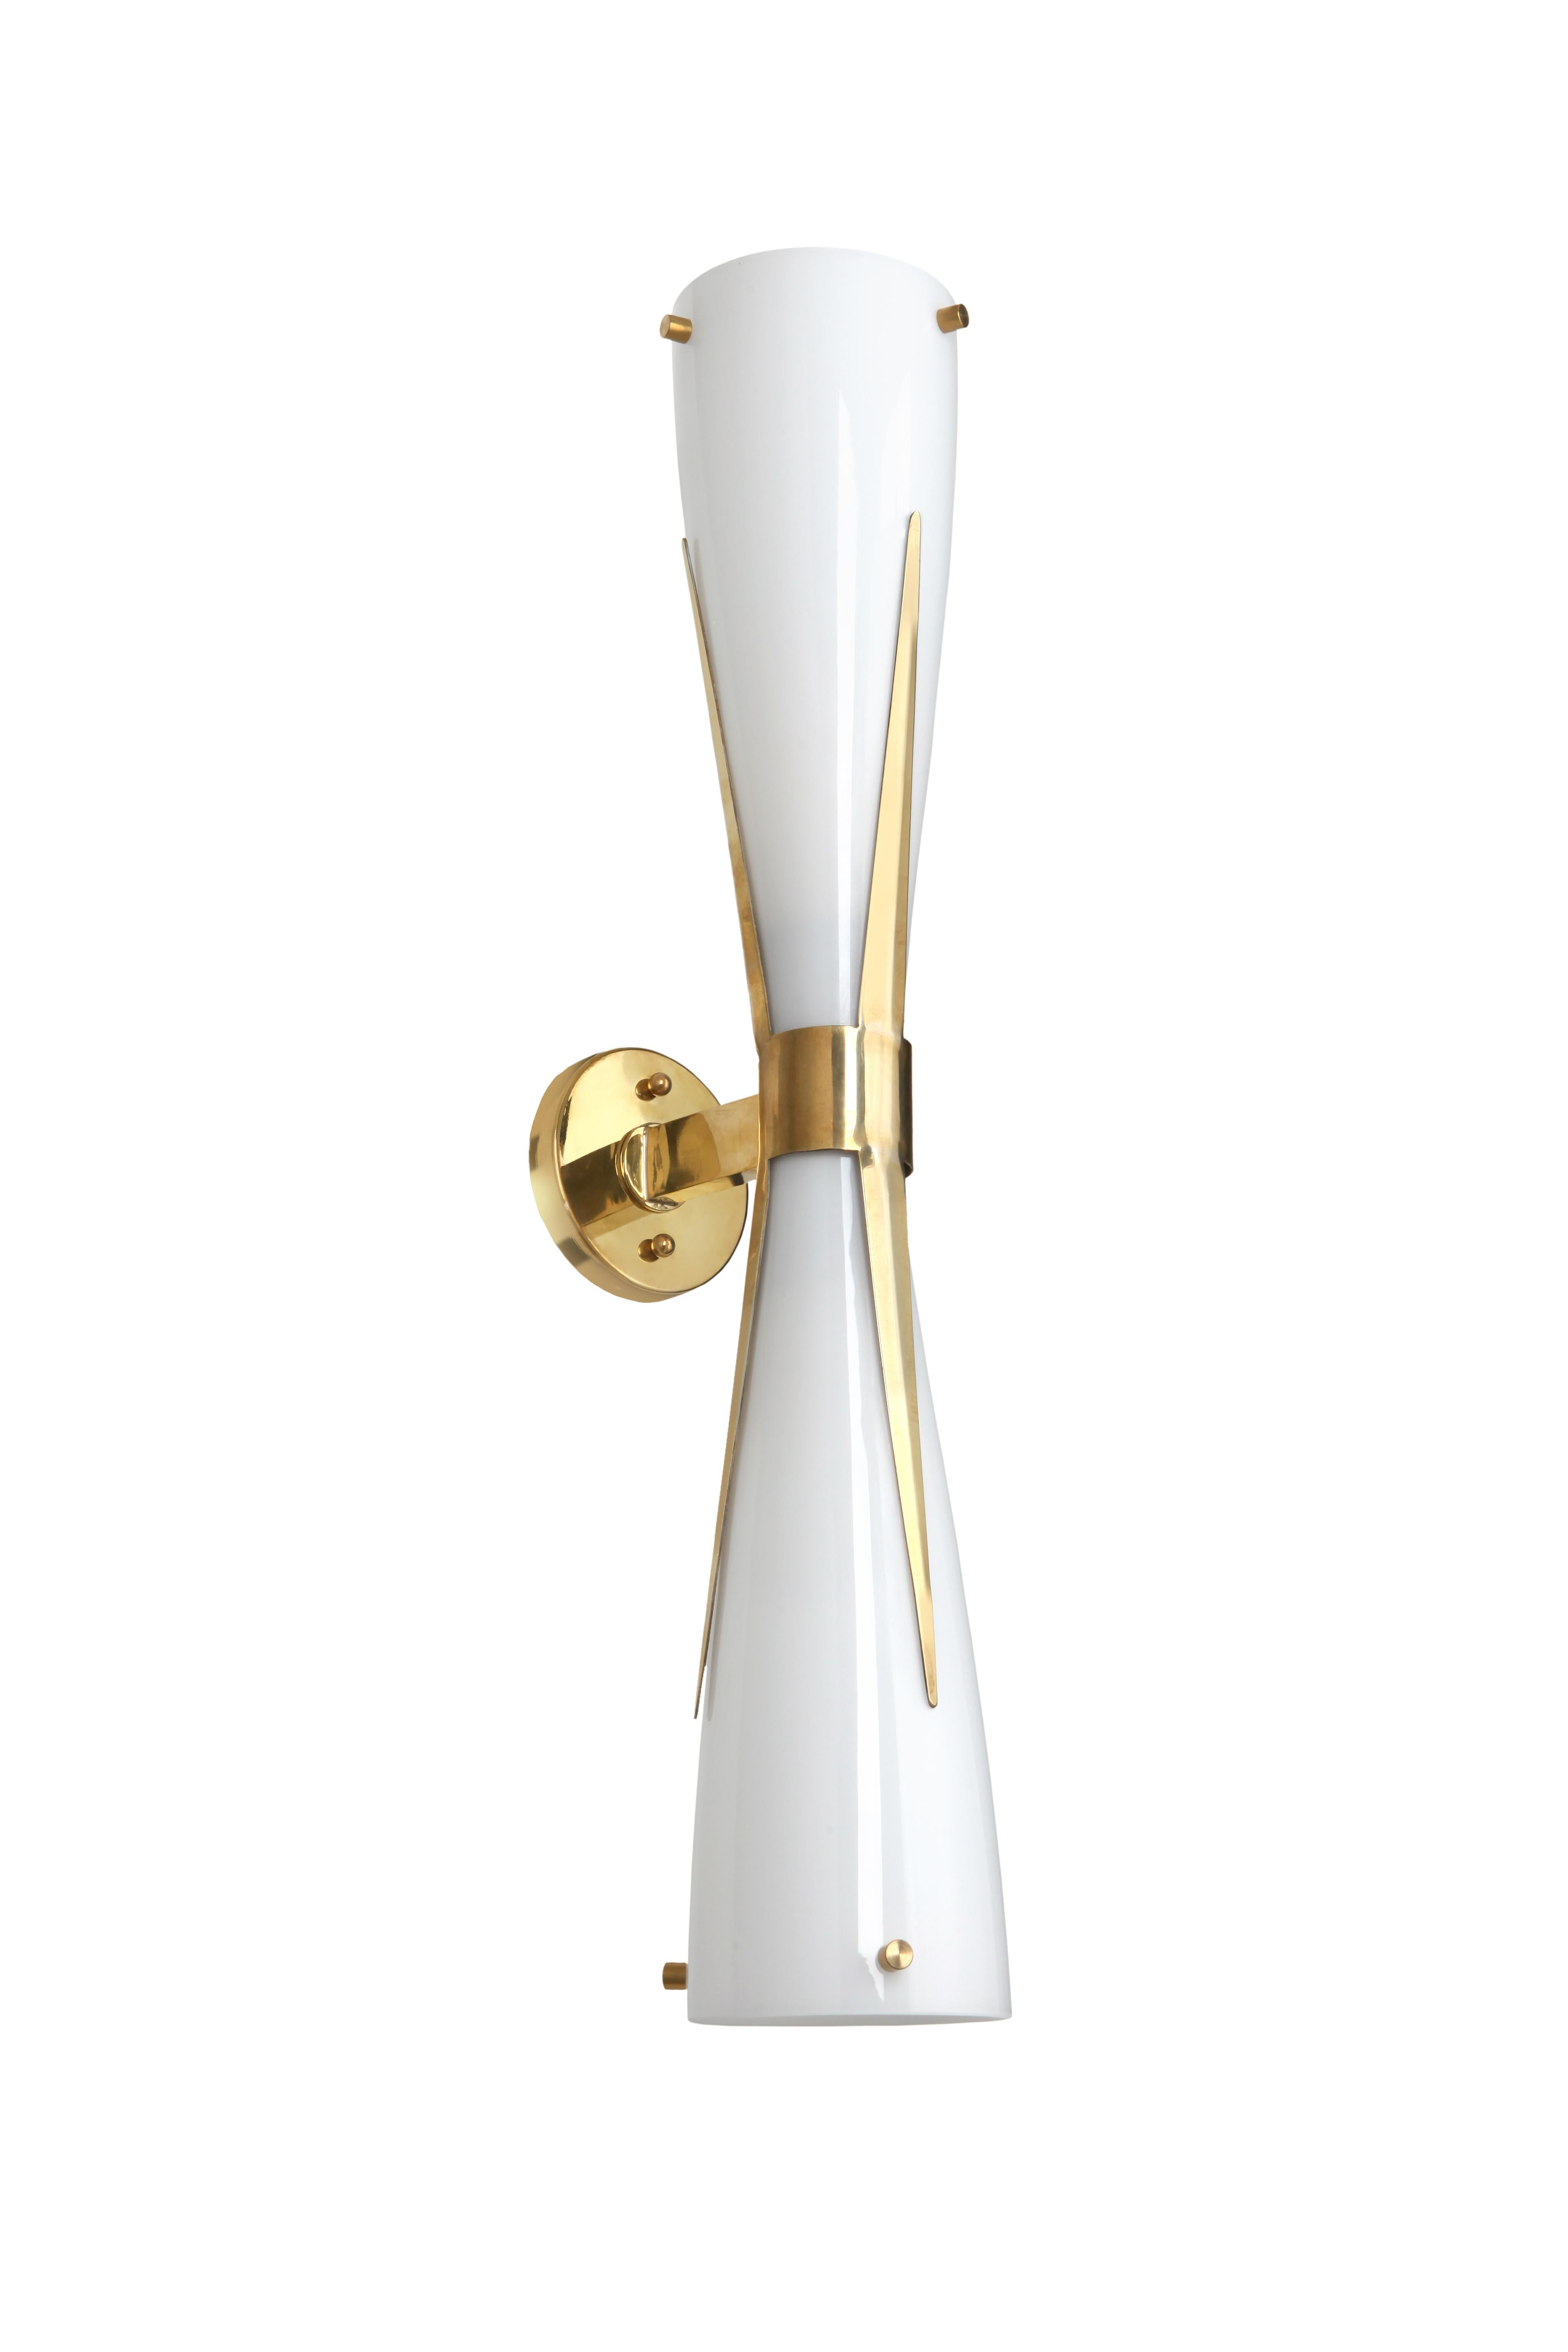 An Italian hour-glass shaped Murano glass light with brass cuff and shard detailing.

Taking inspiration from midcentury Italian design, the deceptively vintage appearance comes from the natural brass, worked in the traditional way which has